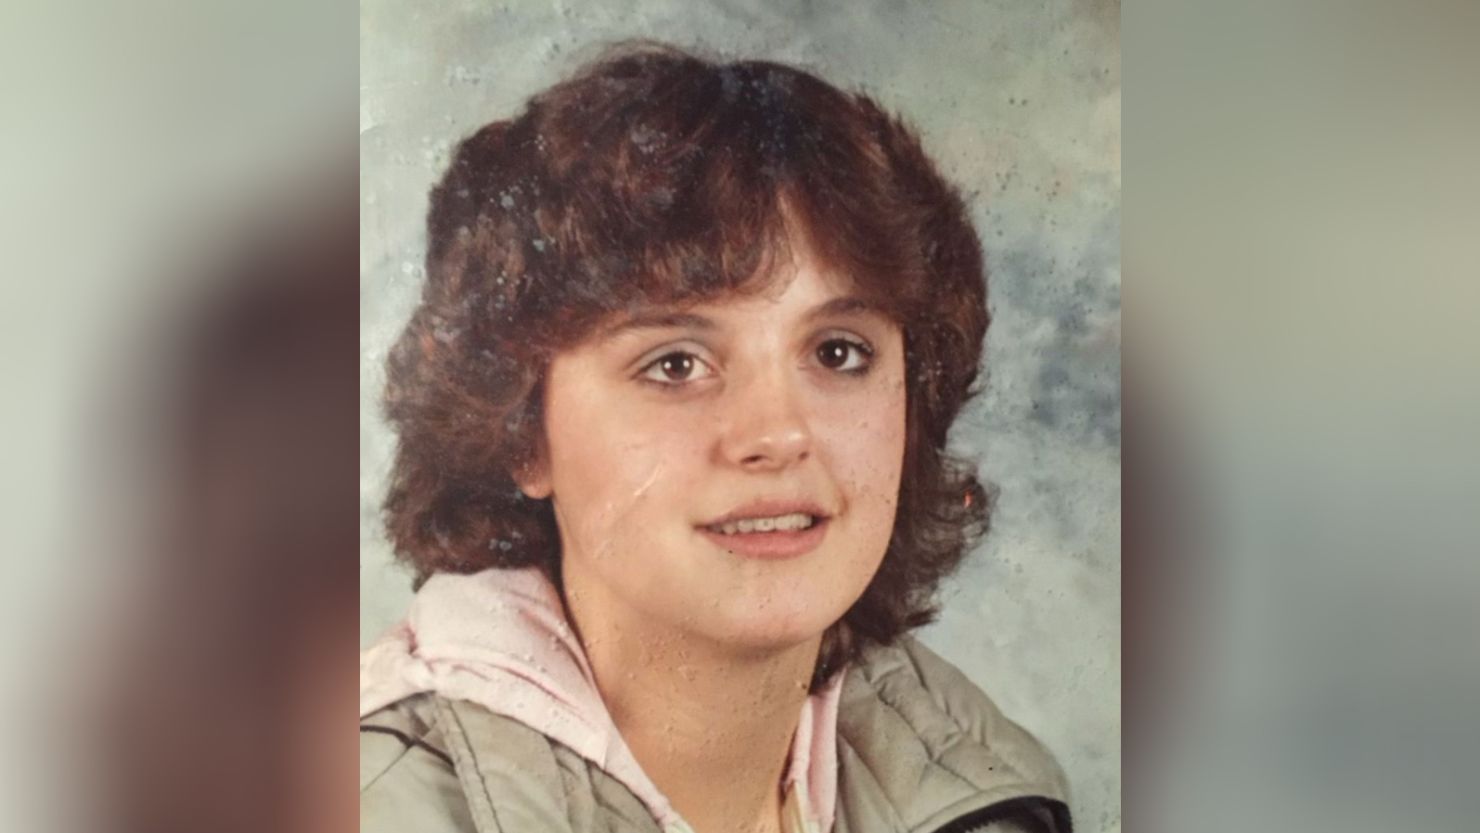 The King County Sheriff's Office has identified the last known remains of the Green River Killer case as belonging to Tammie Liles.